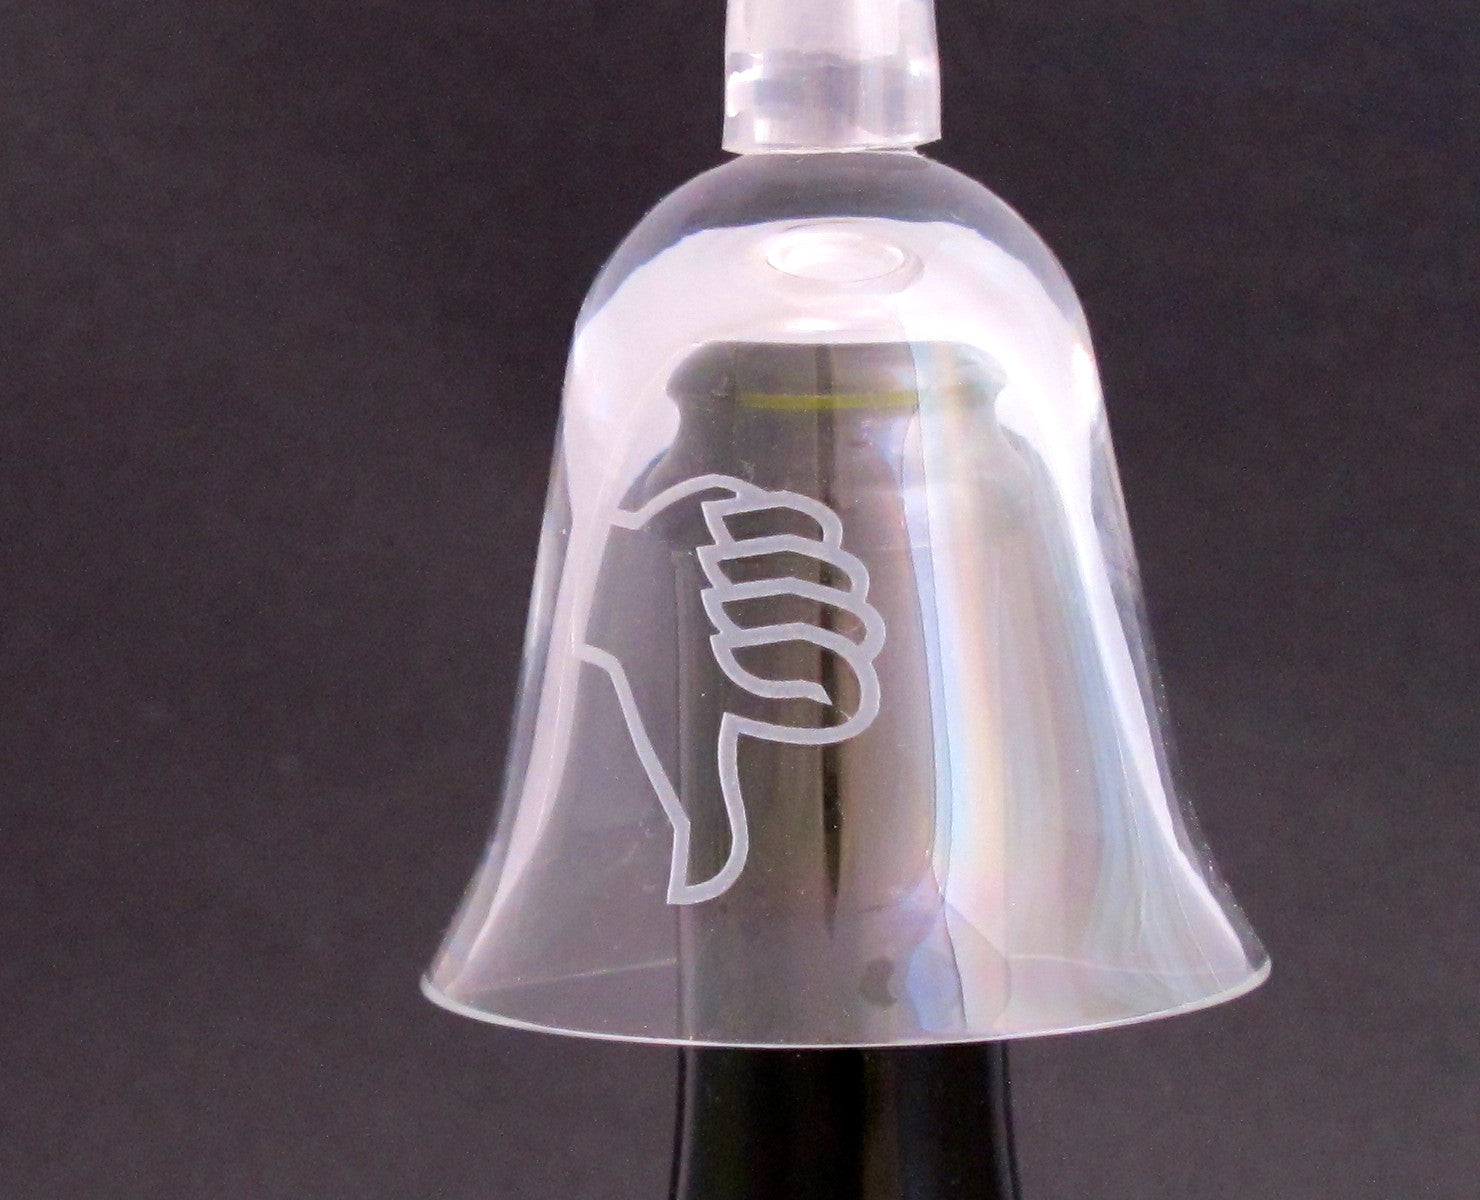 Wine glass sample glass  stopper Thumbs up or down - O'Rourke crystal awards & gifts abp cut glass